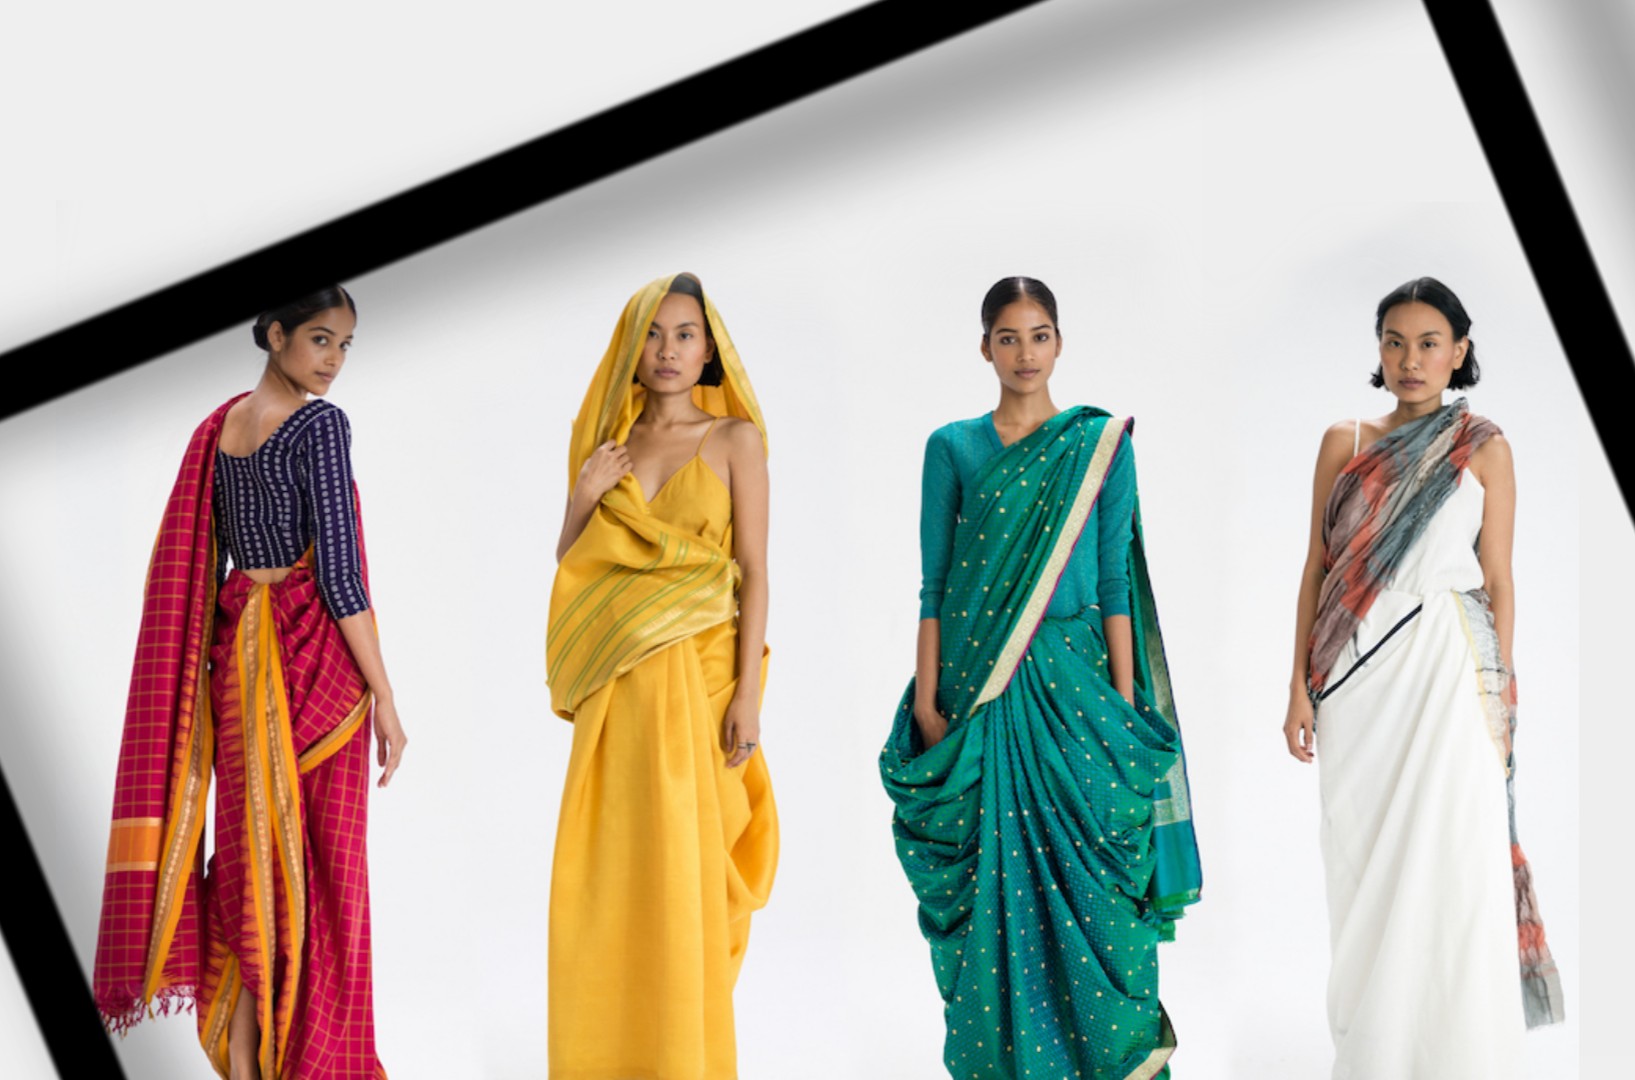 Saree draping styles in fashion 2022. Indian clothing in denver USA 